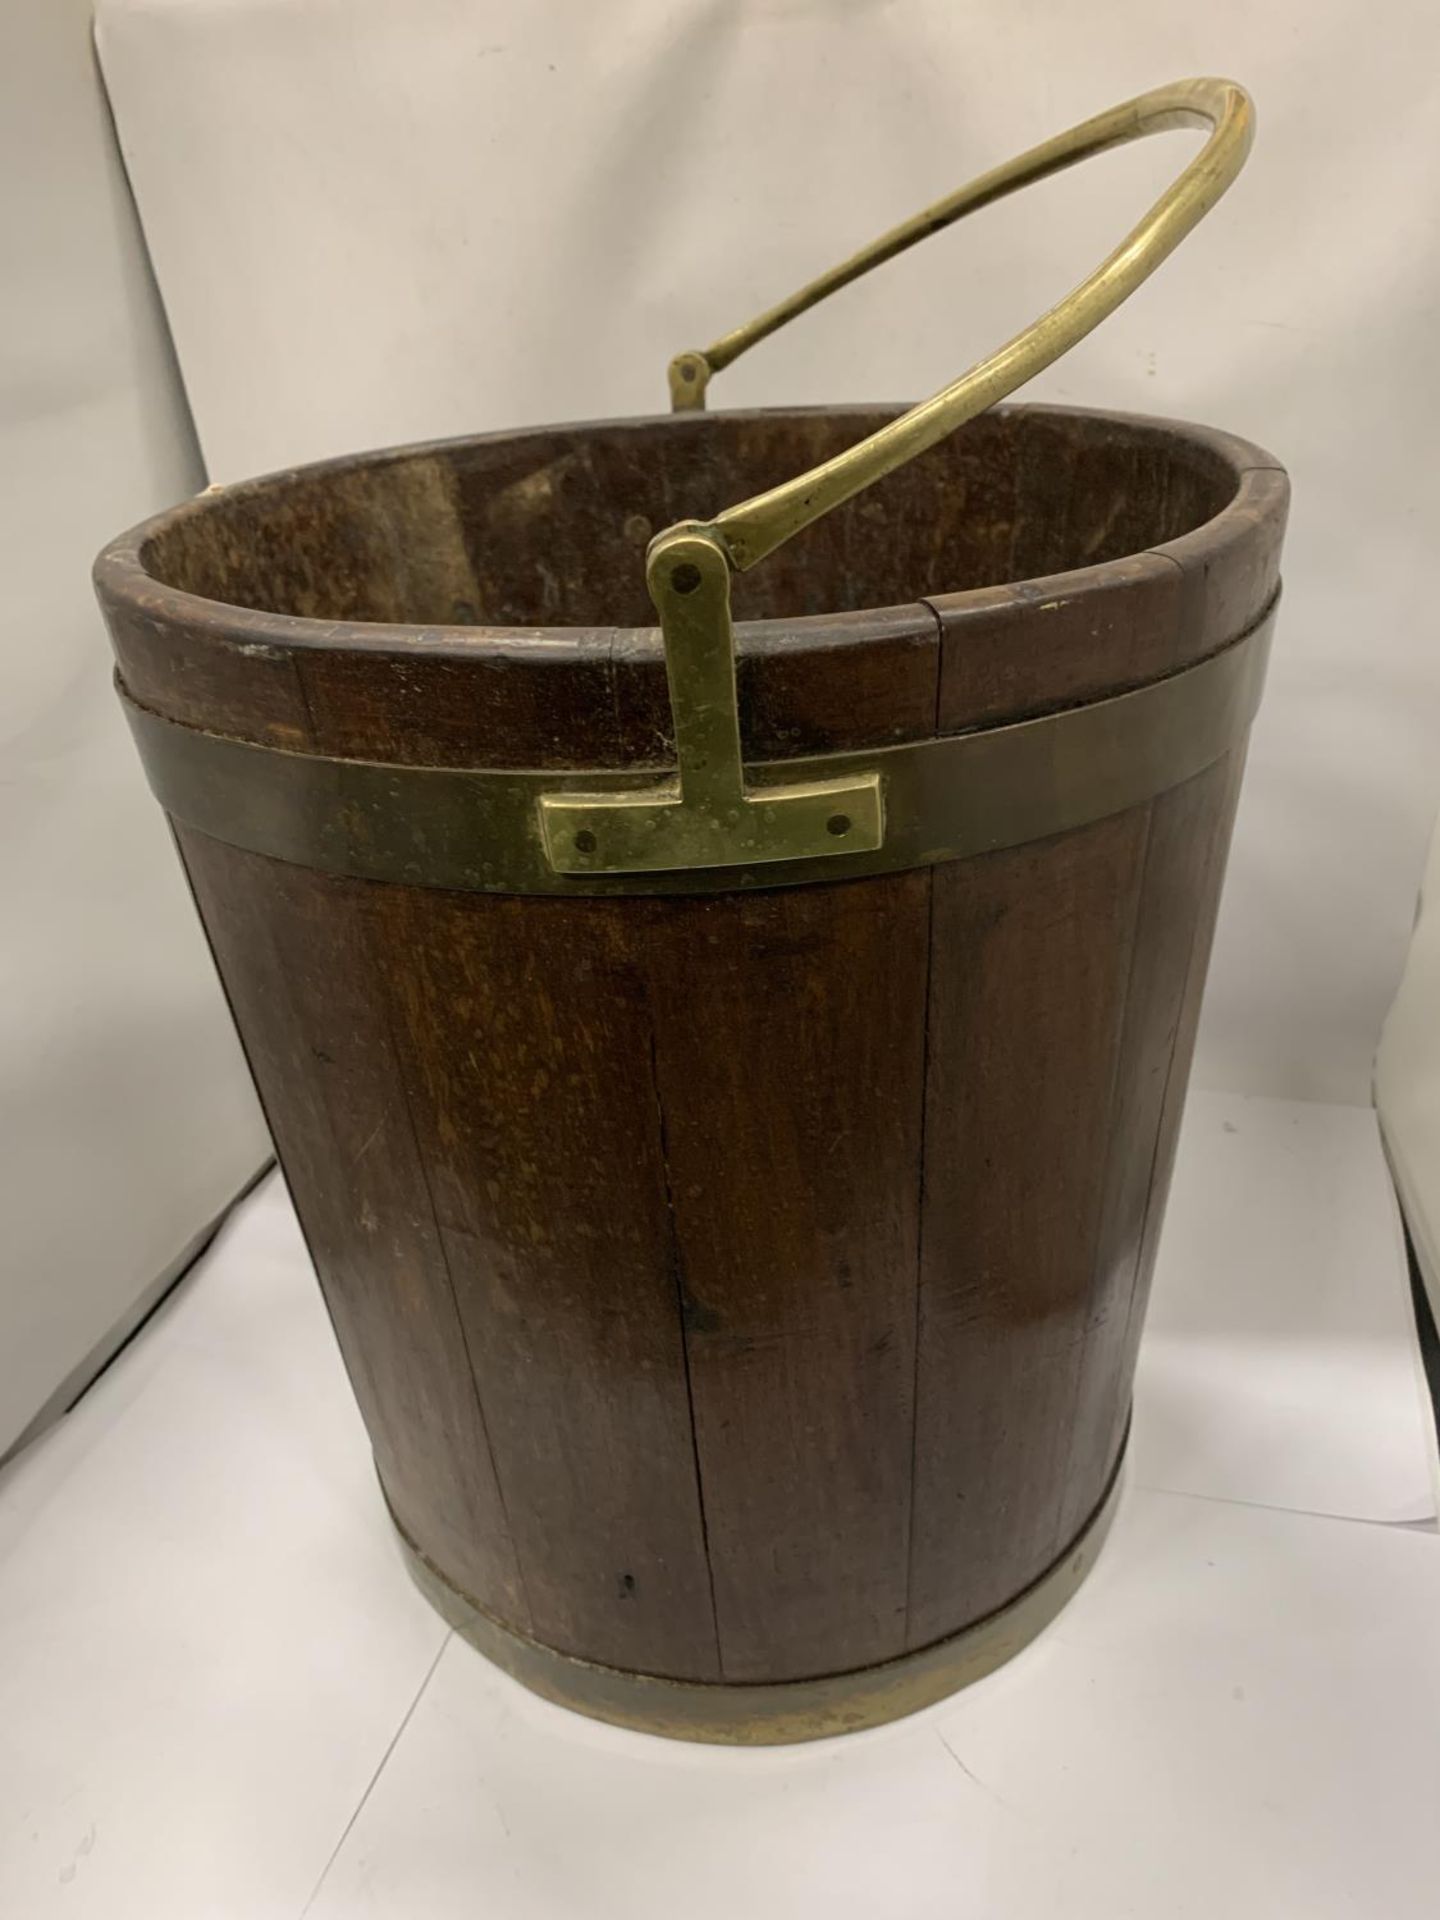 A TALL VINTAGE WOODEN BUCKET WITH BRASS HANDLE AND BANDING - Image 2 of 3